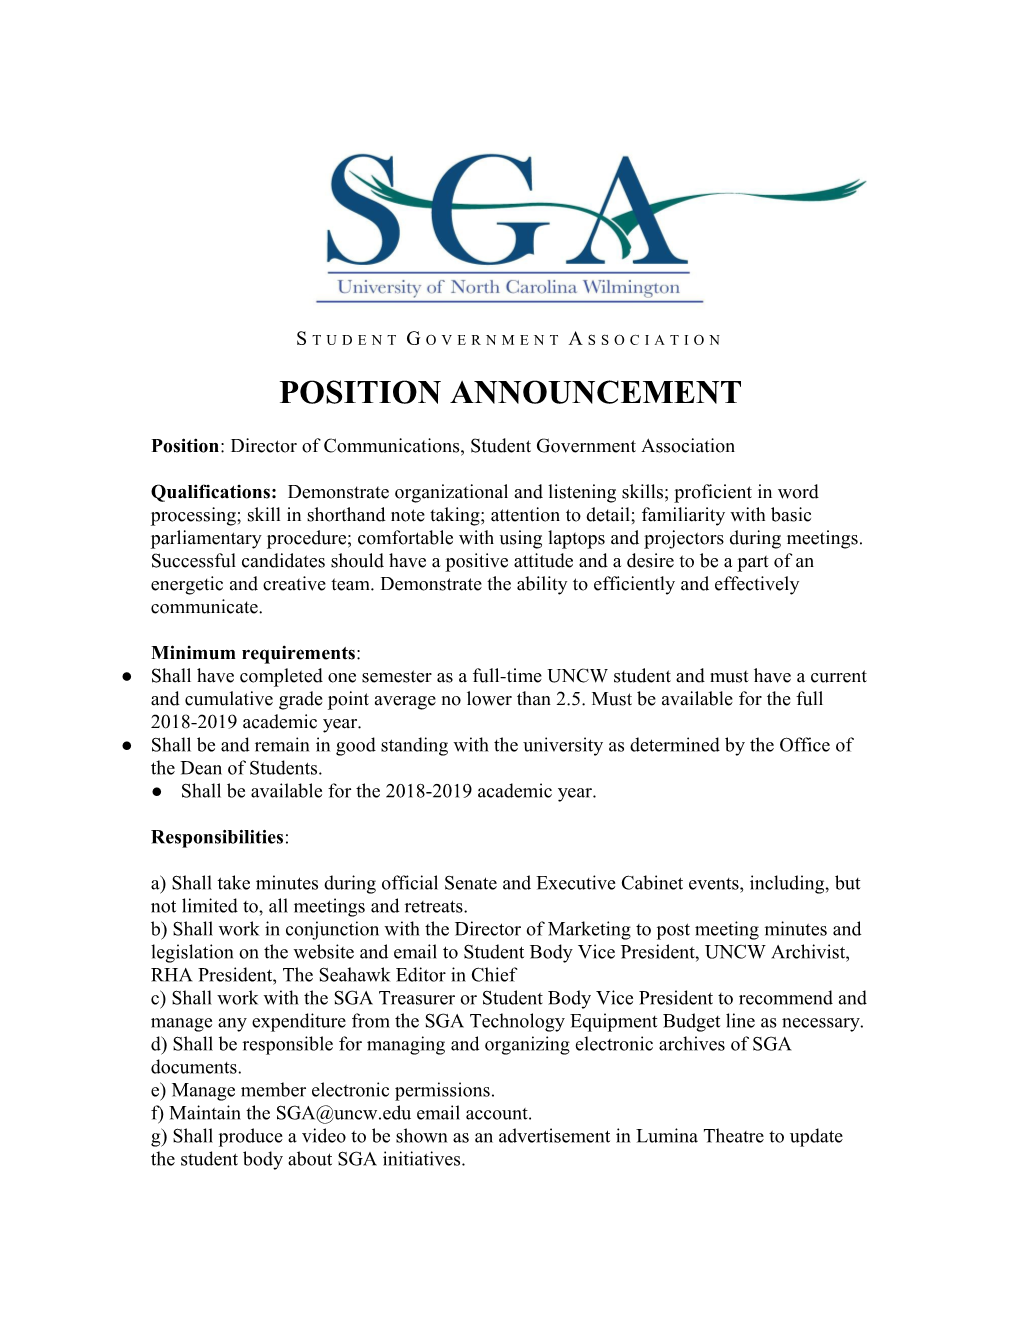 Position: Director of Communications, Student Government Association